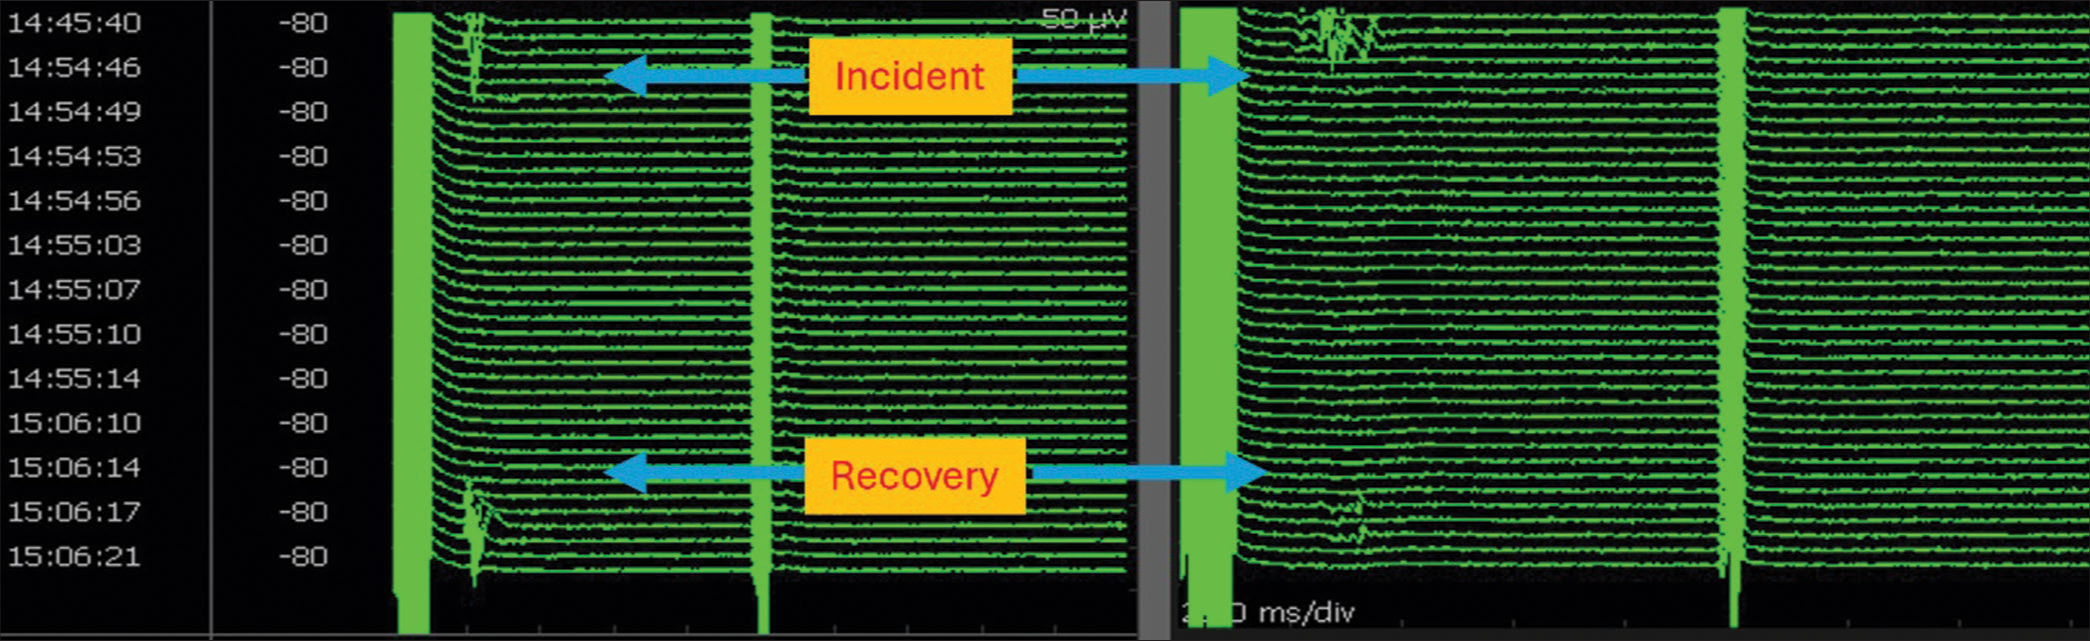 Stack view of facial motor-evoked potentials (FMEP) drop followed by recovery following bipolar cautery to arrest bleeding: illustrated channels are oculi (left) and oris (right). There were no concomitant neurotonic discharges. Note from the timestamp that it took about 12 min for the FMEP drop to recover. During this time, surgical pause was initiated, blood pressure was raised, and papaverine was irrigated. This is a classical illustration of the identification of an ongoing facial nerve injury at an early reversible stage using FMEPs and initiation of corrective measures resulting in near-total recovery. Surgery was resumed following recovery.